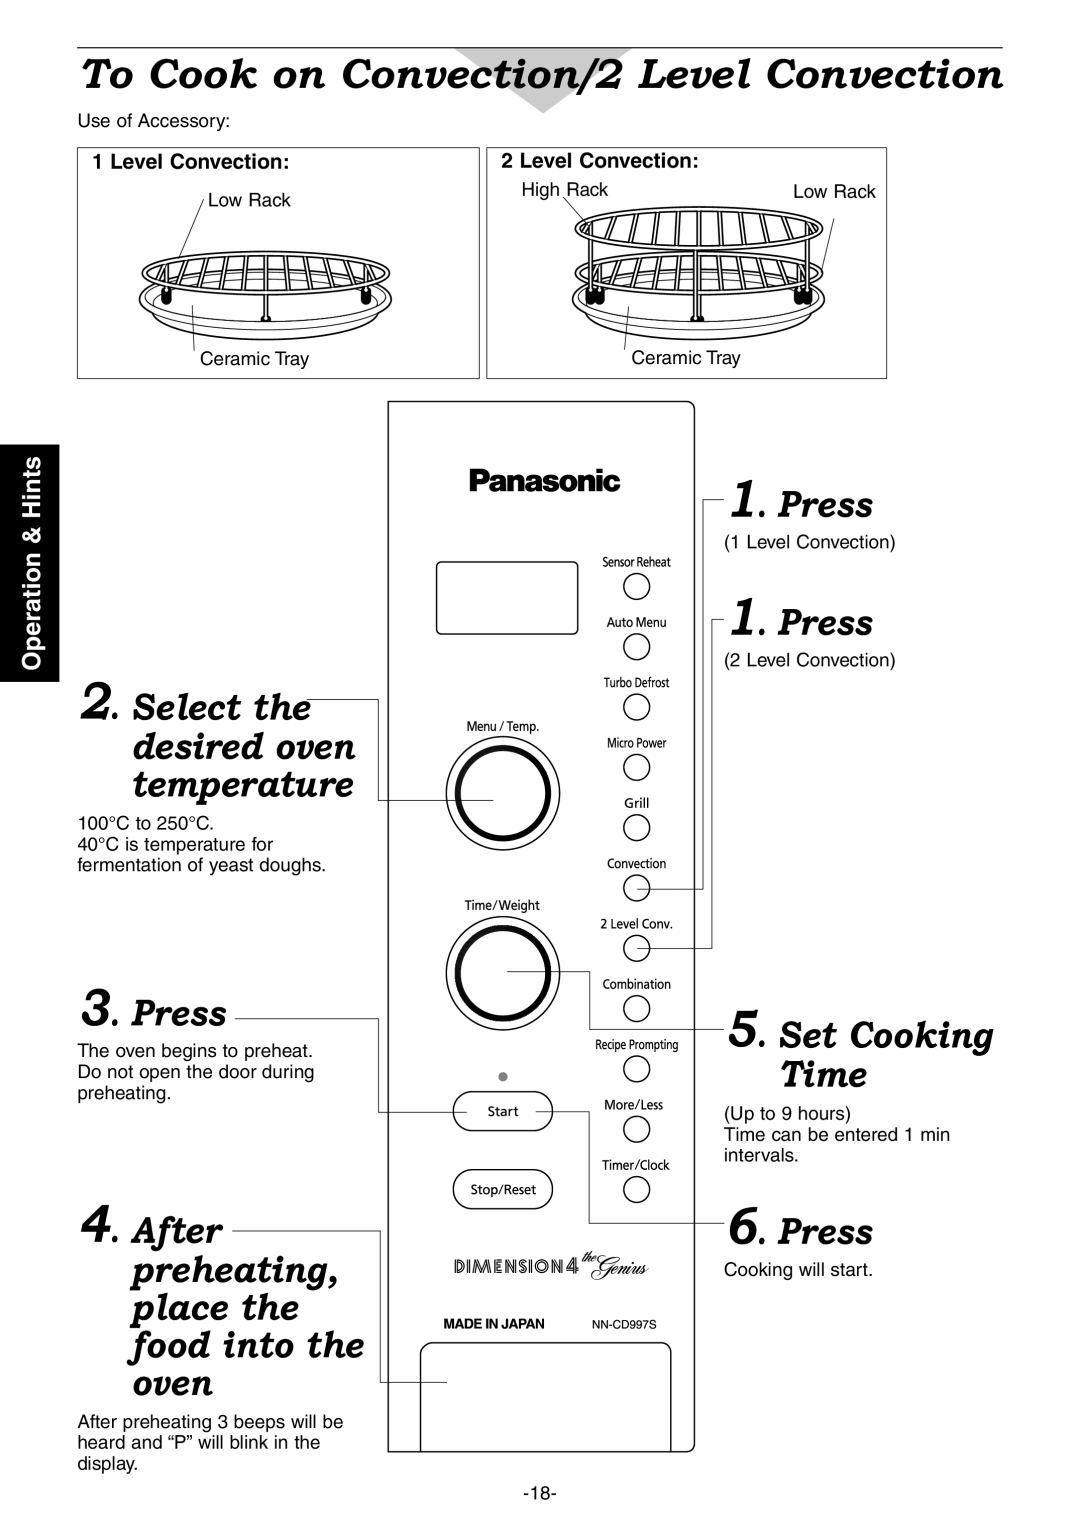 Panasonic NN-CD987W To Cook on Convection/2 Level Convection, Select the desired oven temperature, Press, Set Cooking Time 